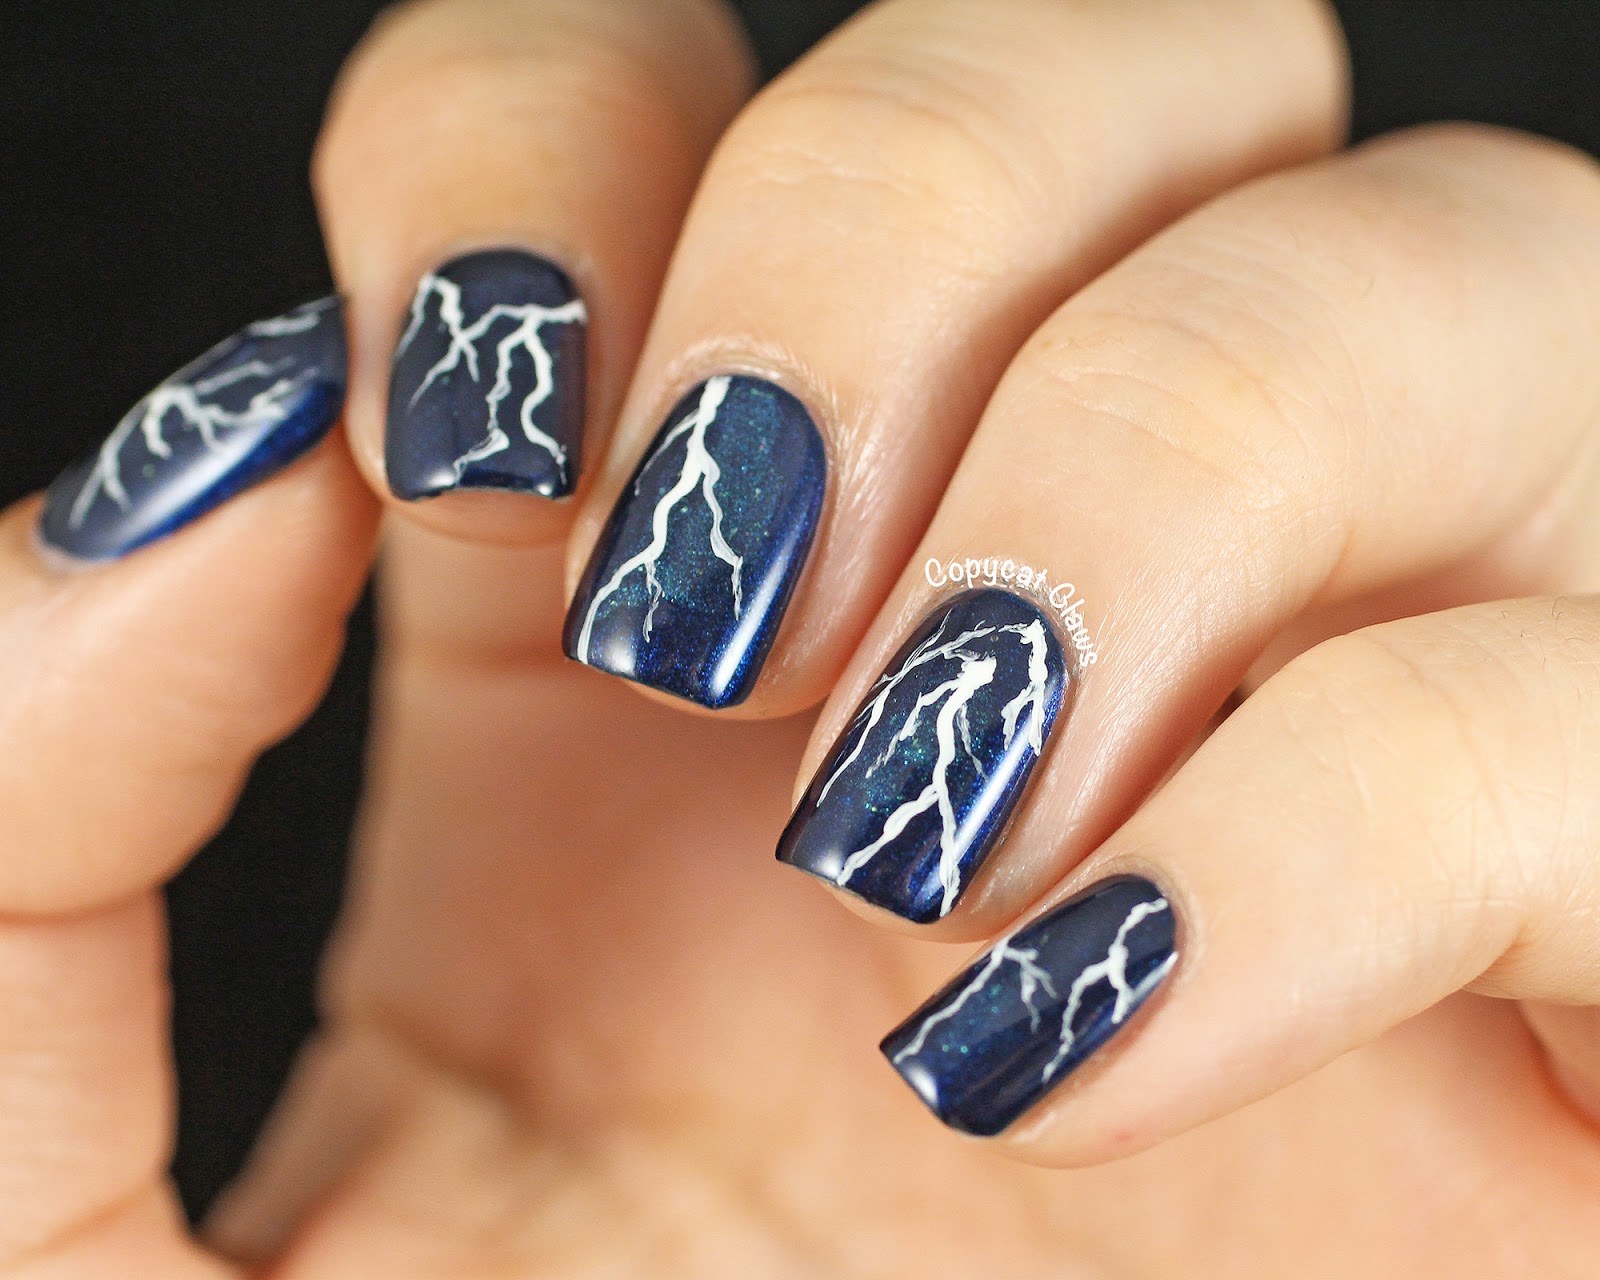 2. Electric Nail Art - wide 6